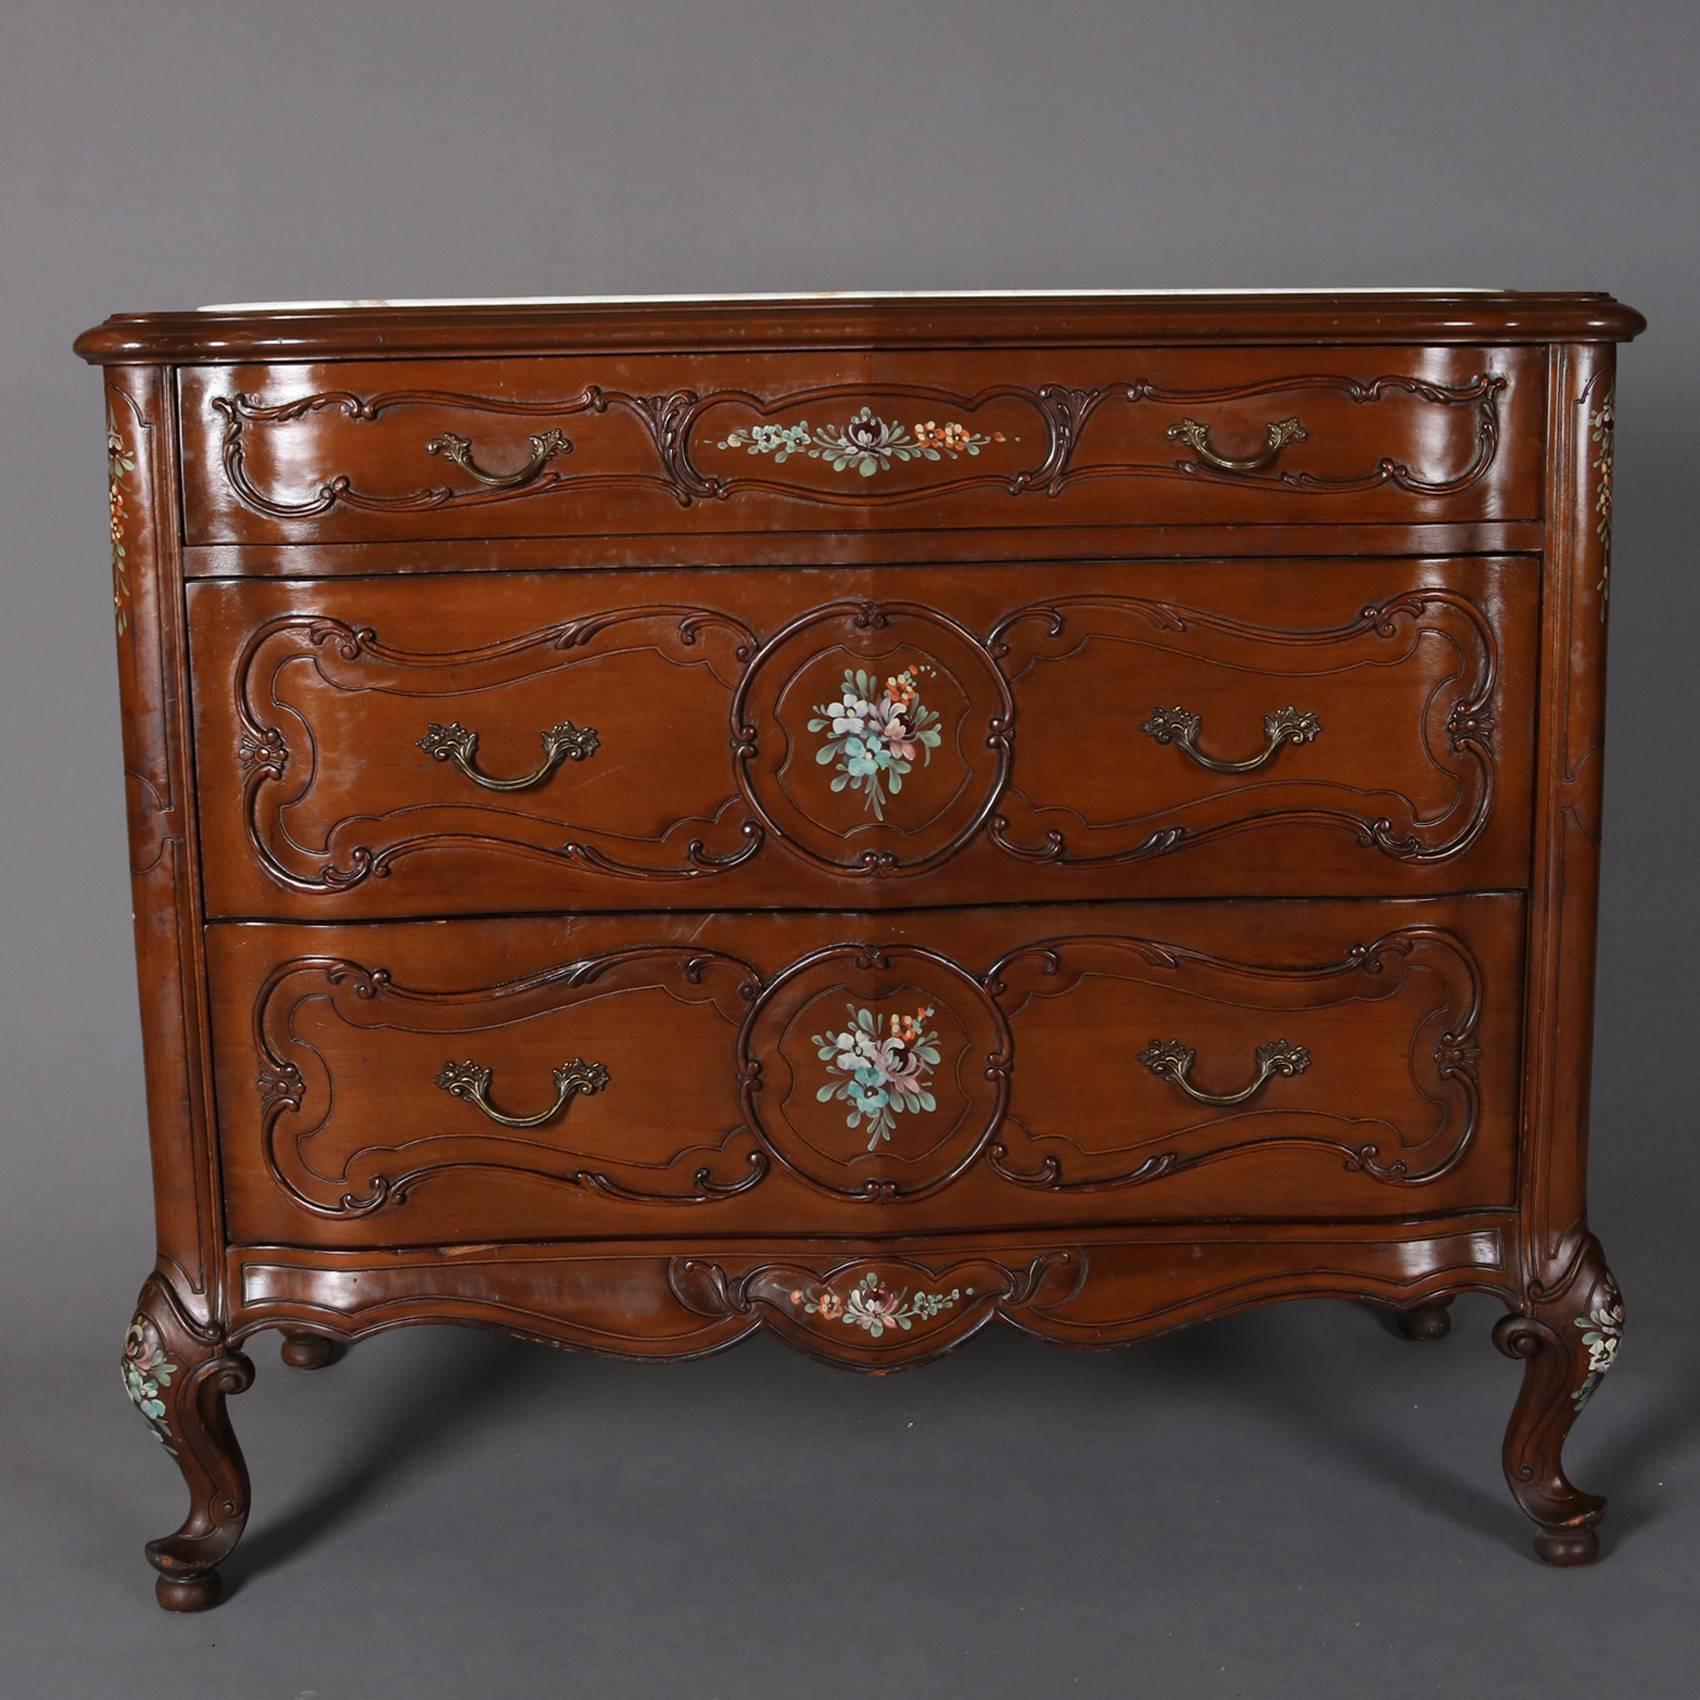 Vintage French Louis XIV style commode features mahogany construction with central hand painted floral reserves, carved scroll and foliate decoration and seated on cabriole legs, inset marble top and cast foliate pulls, 20th century

Measures -